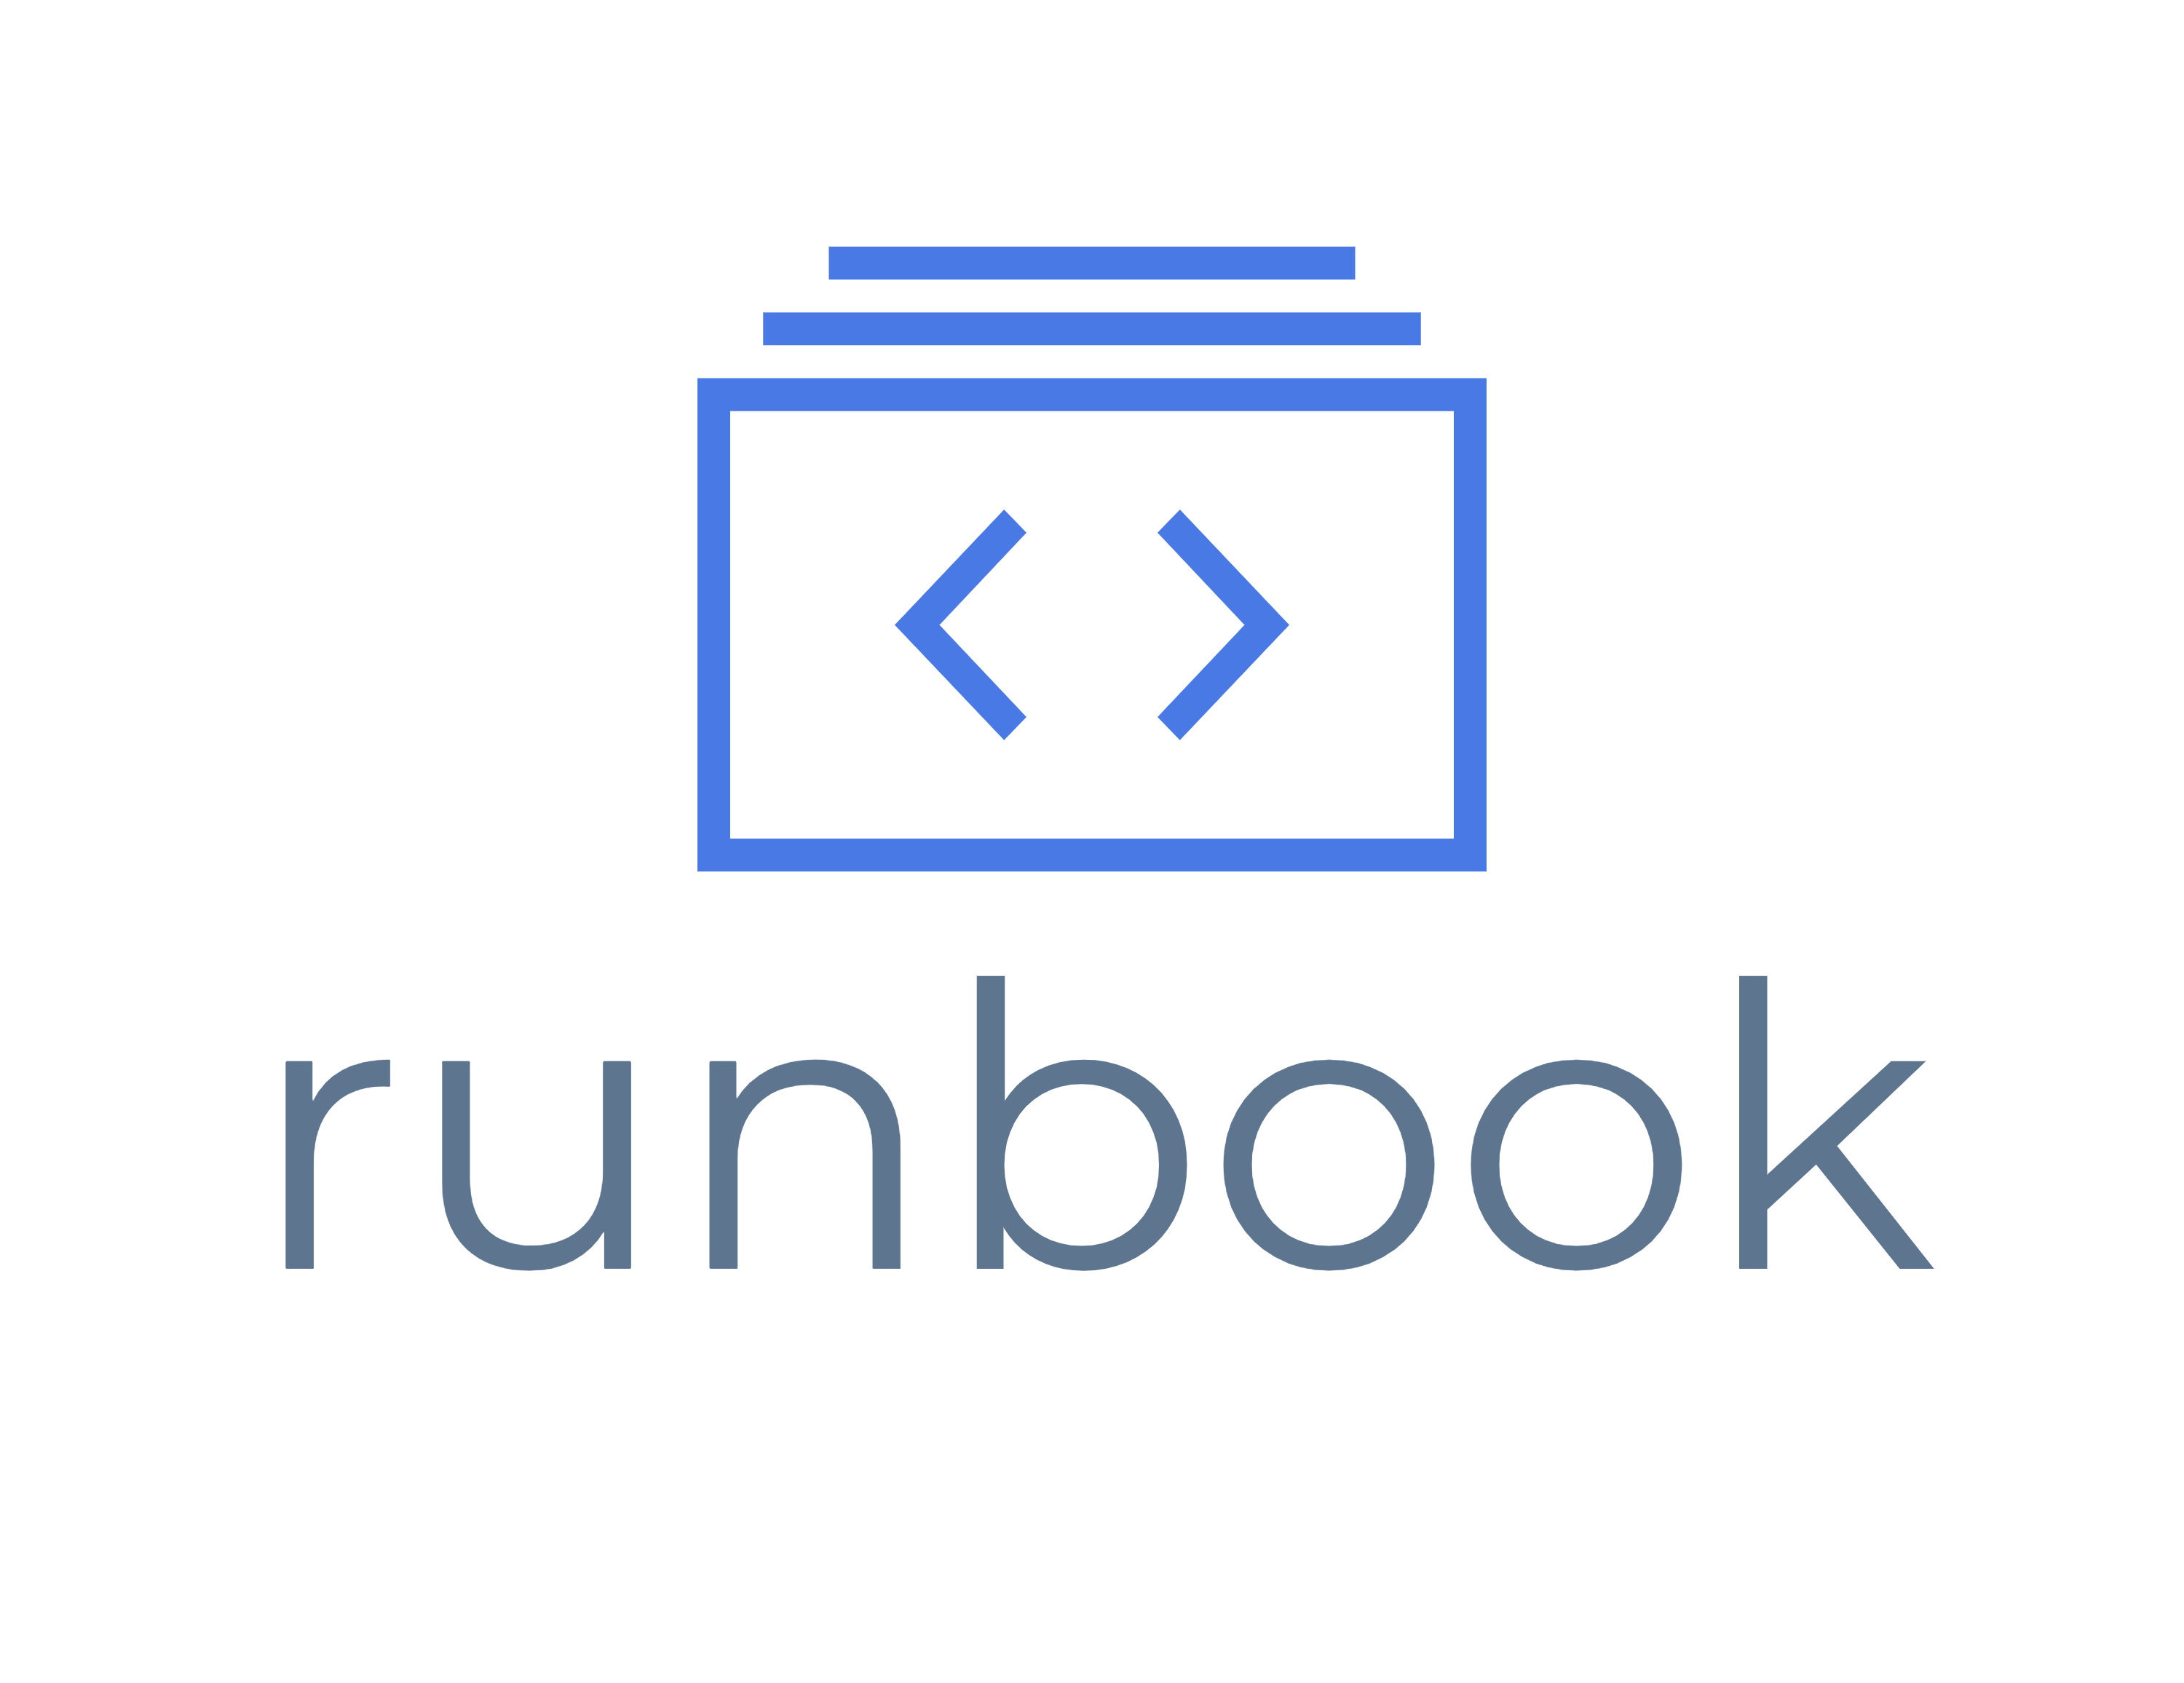 Runbook - Executable markdown documents that you can run, template, and share!